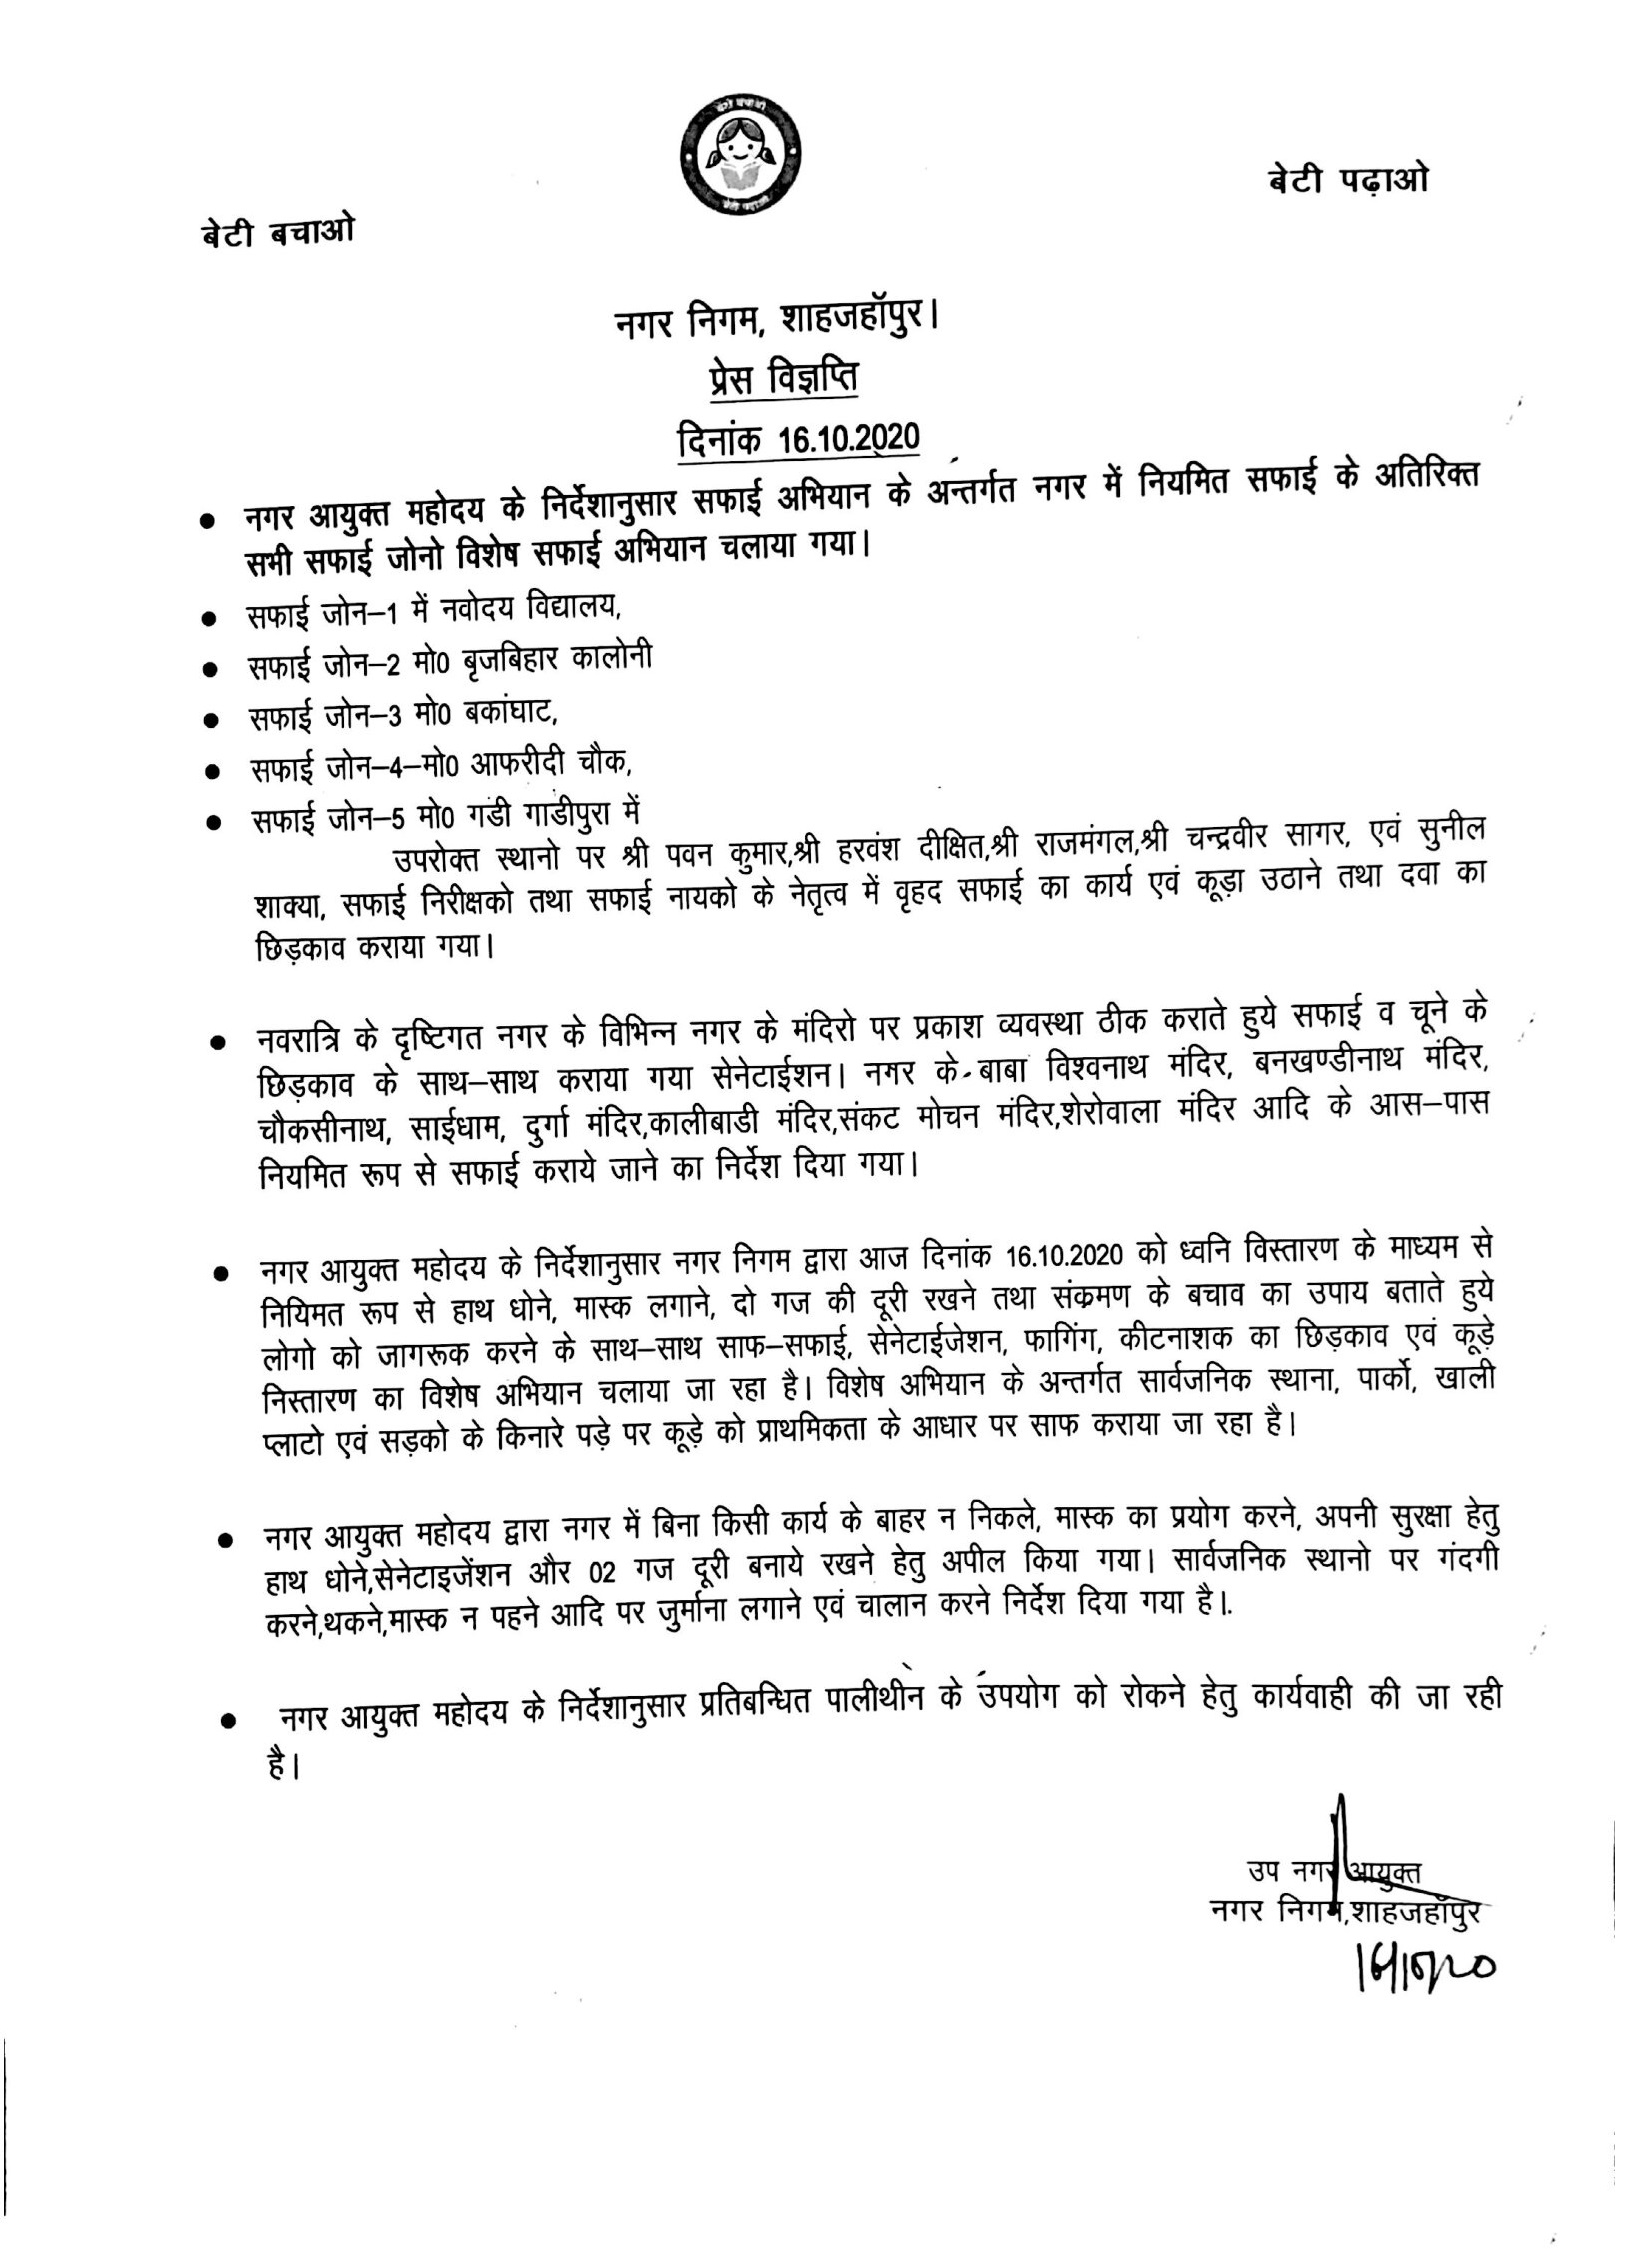 Regarding special cleanliness campaign in all the cleanliness zones of the city in additional to the normal cleanliness drive, as per directions of City Commissioner